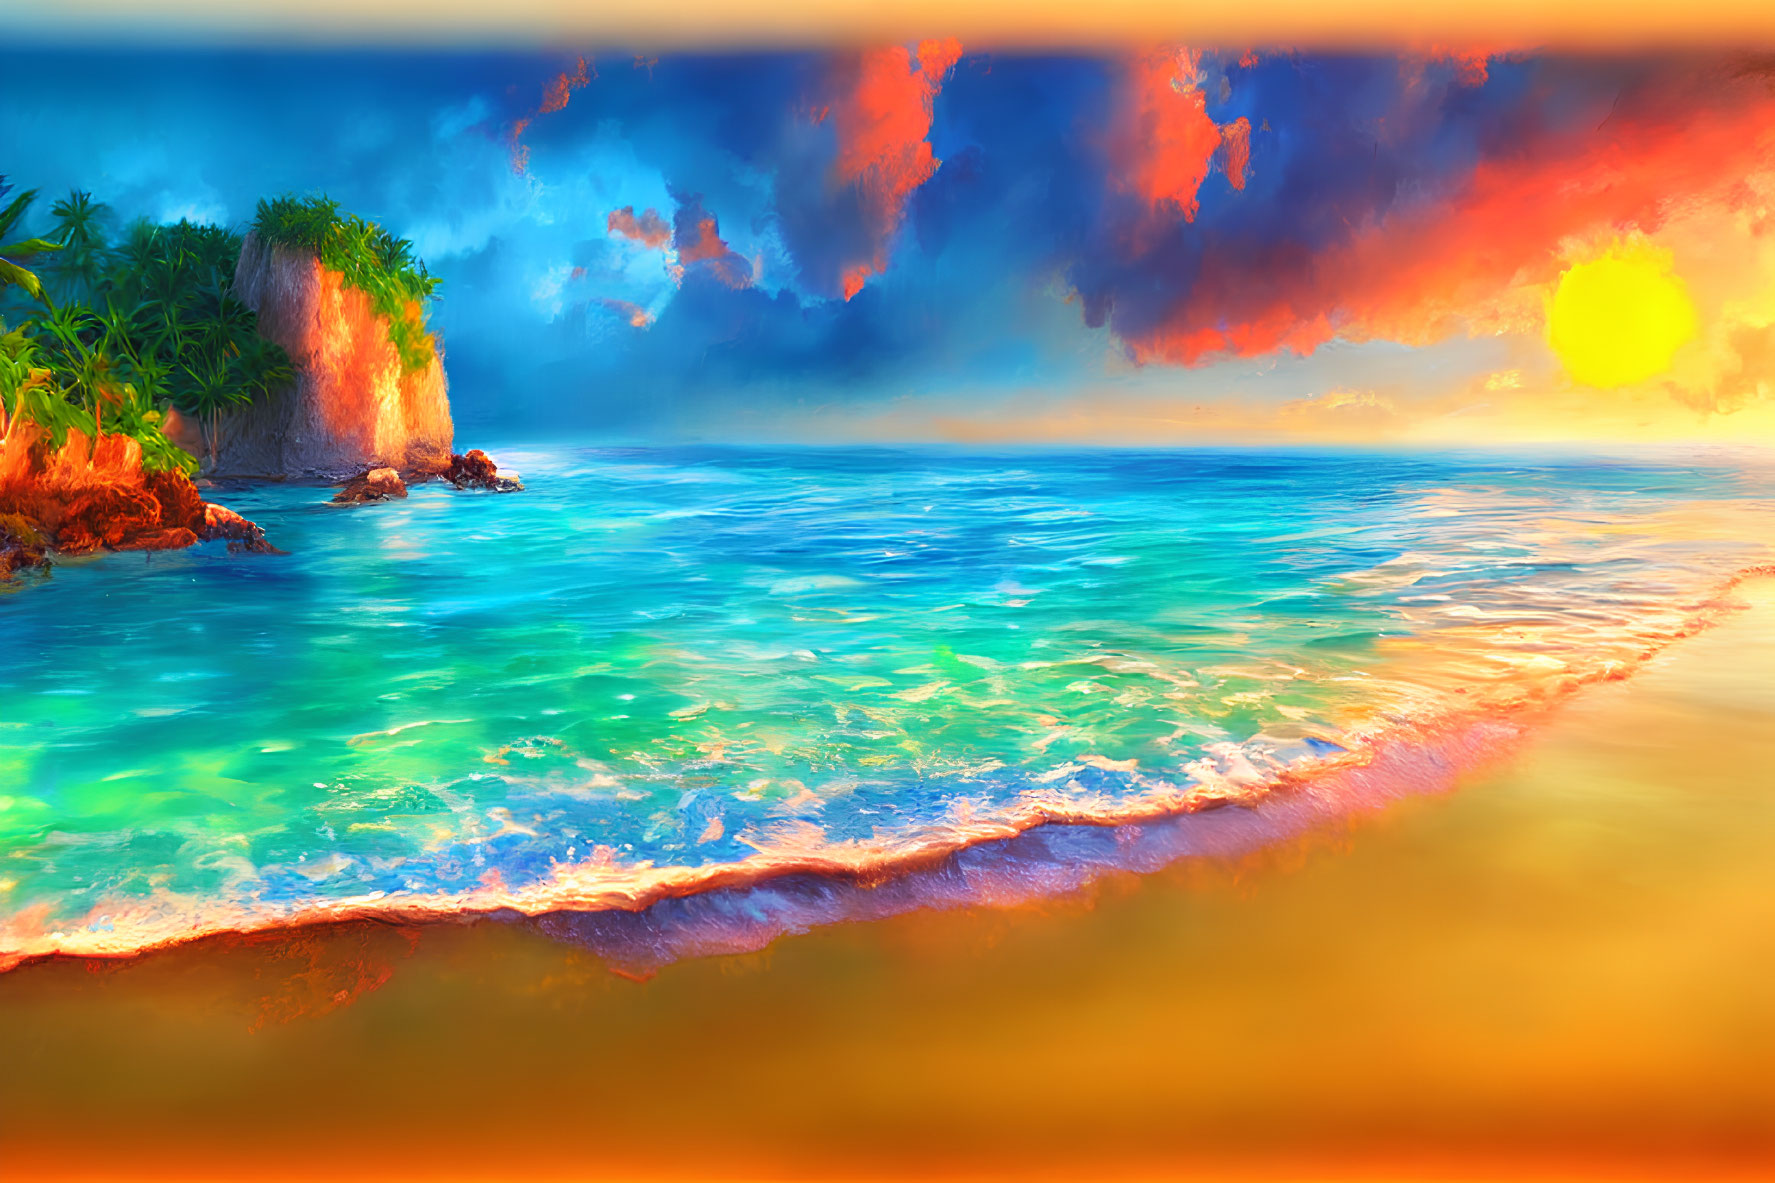 Scenic tropical sunset over tranquil ocean with golden sun and fiery clouds